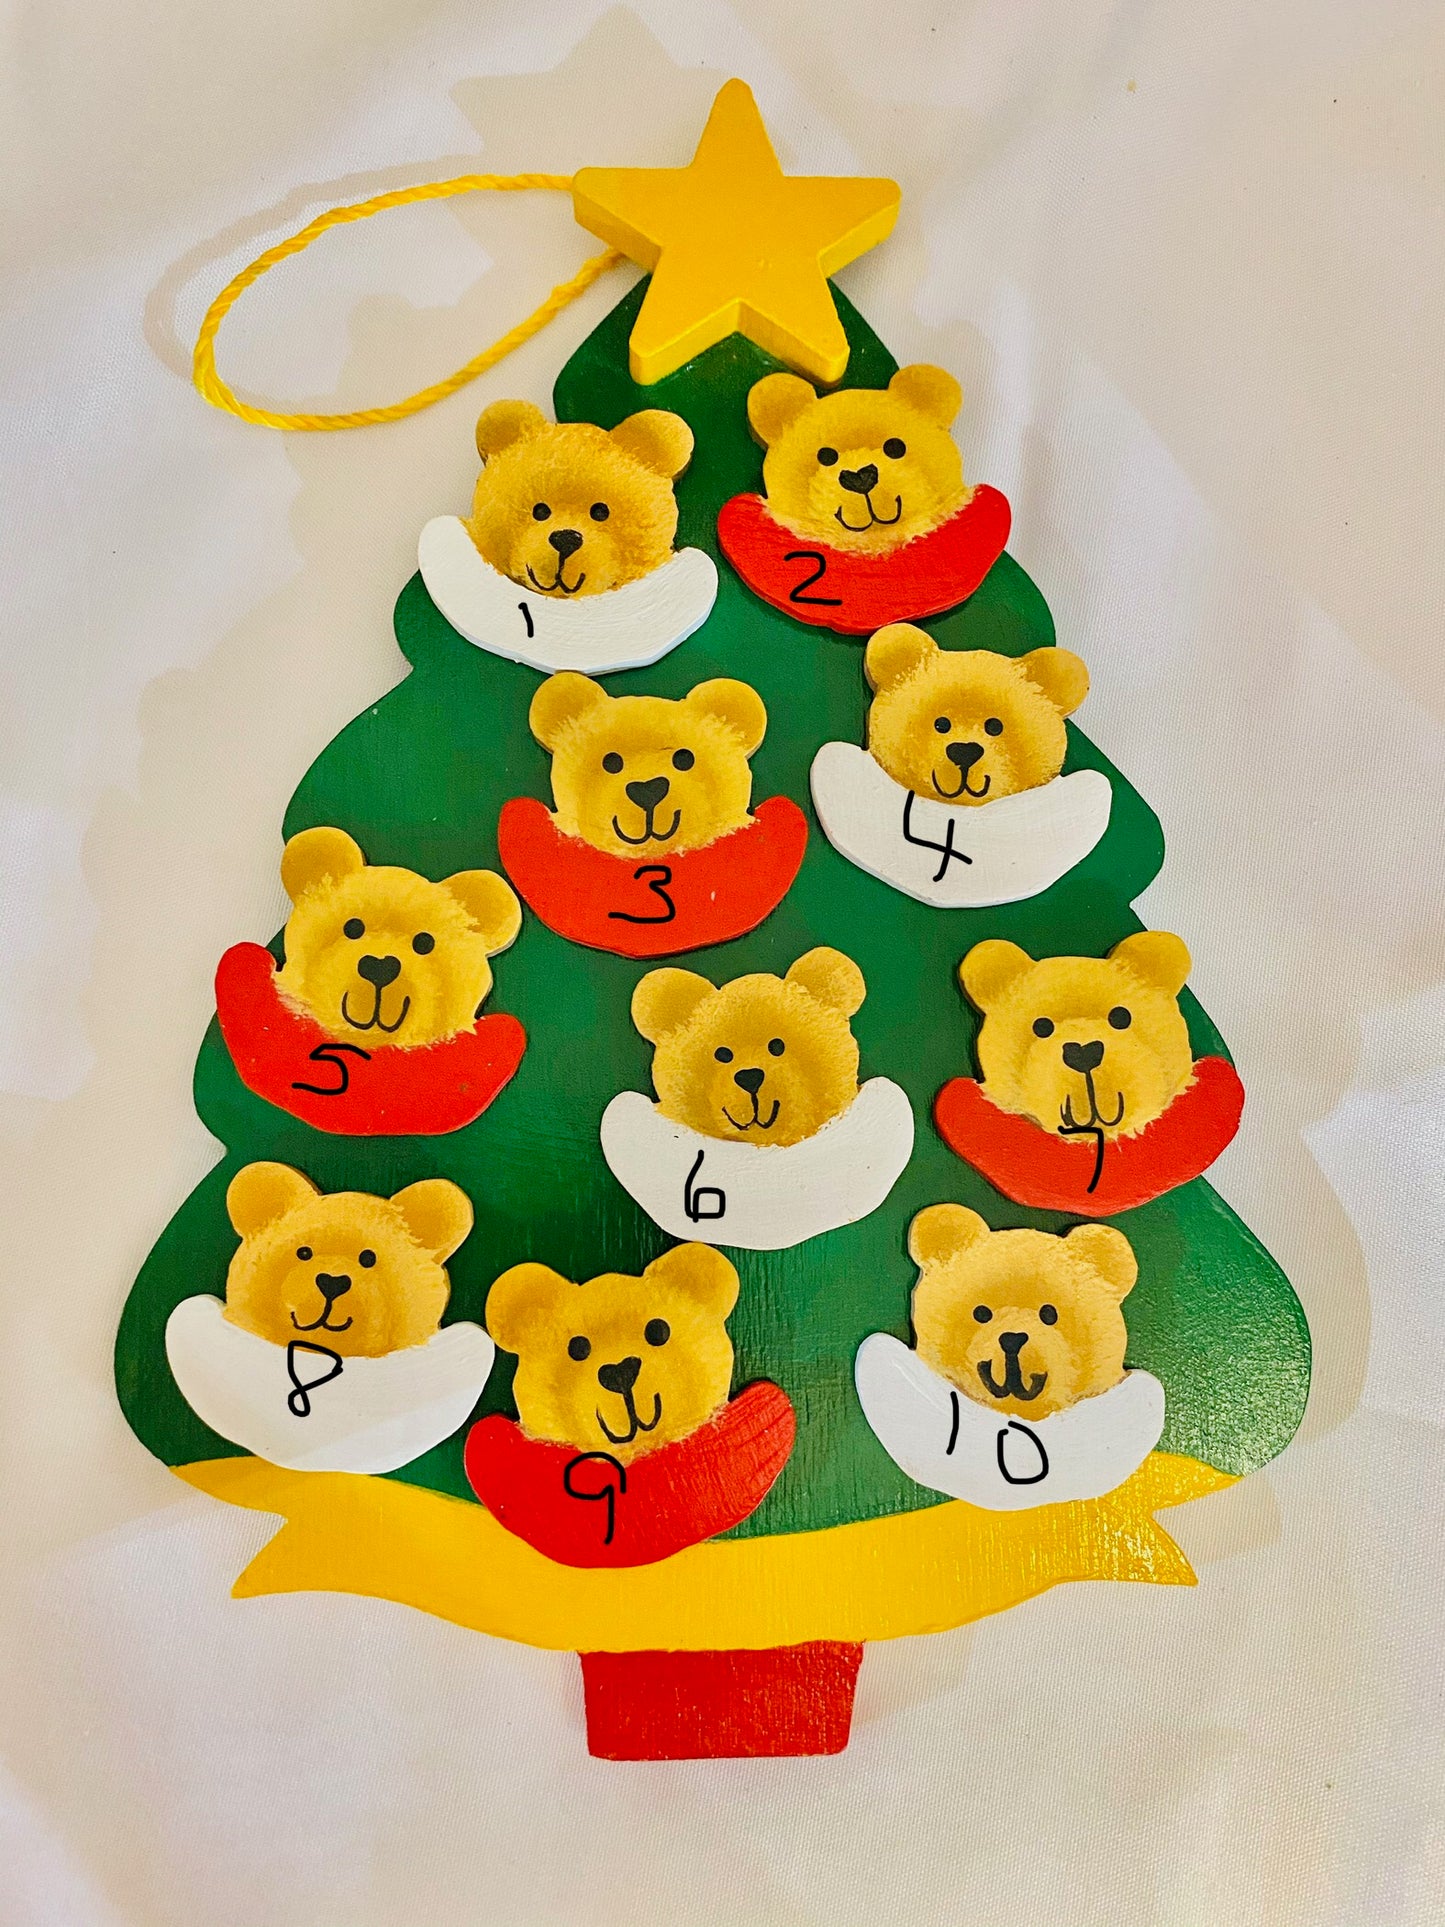 Personalized Ornament 10 Bear Faces on a Christmas Tree  6" x 4.5"